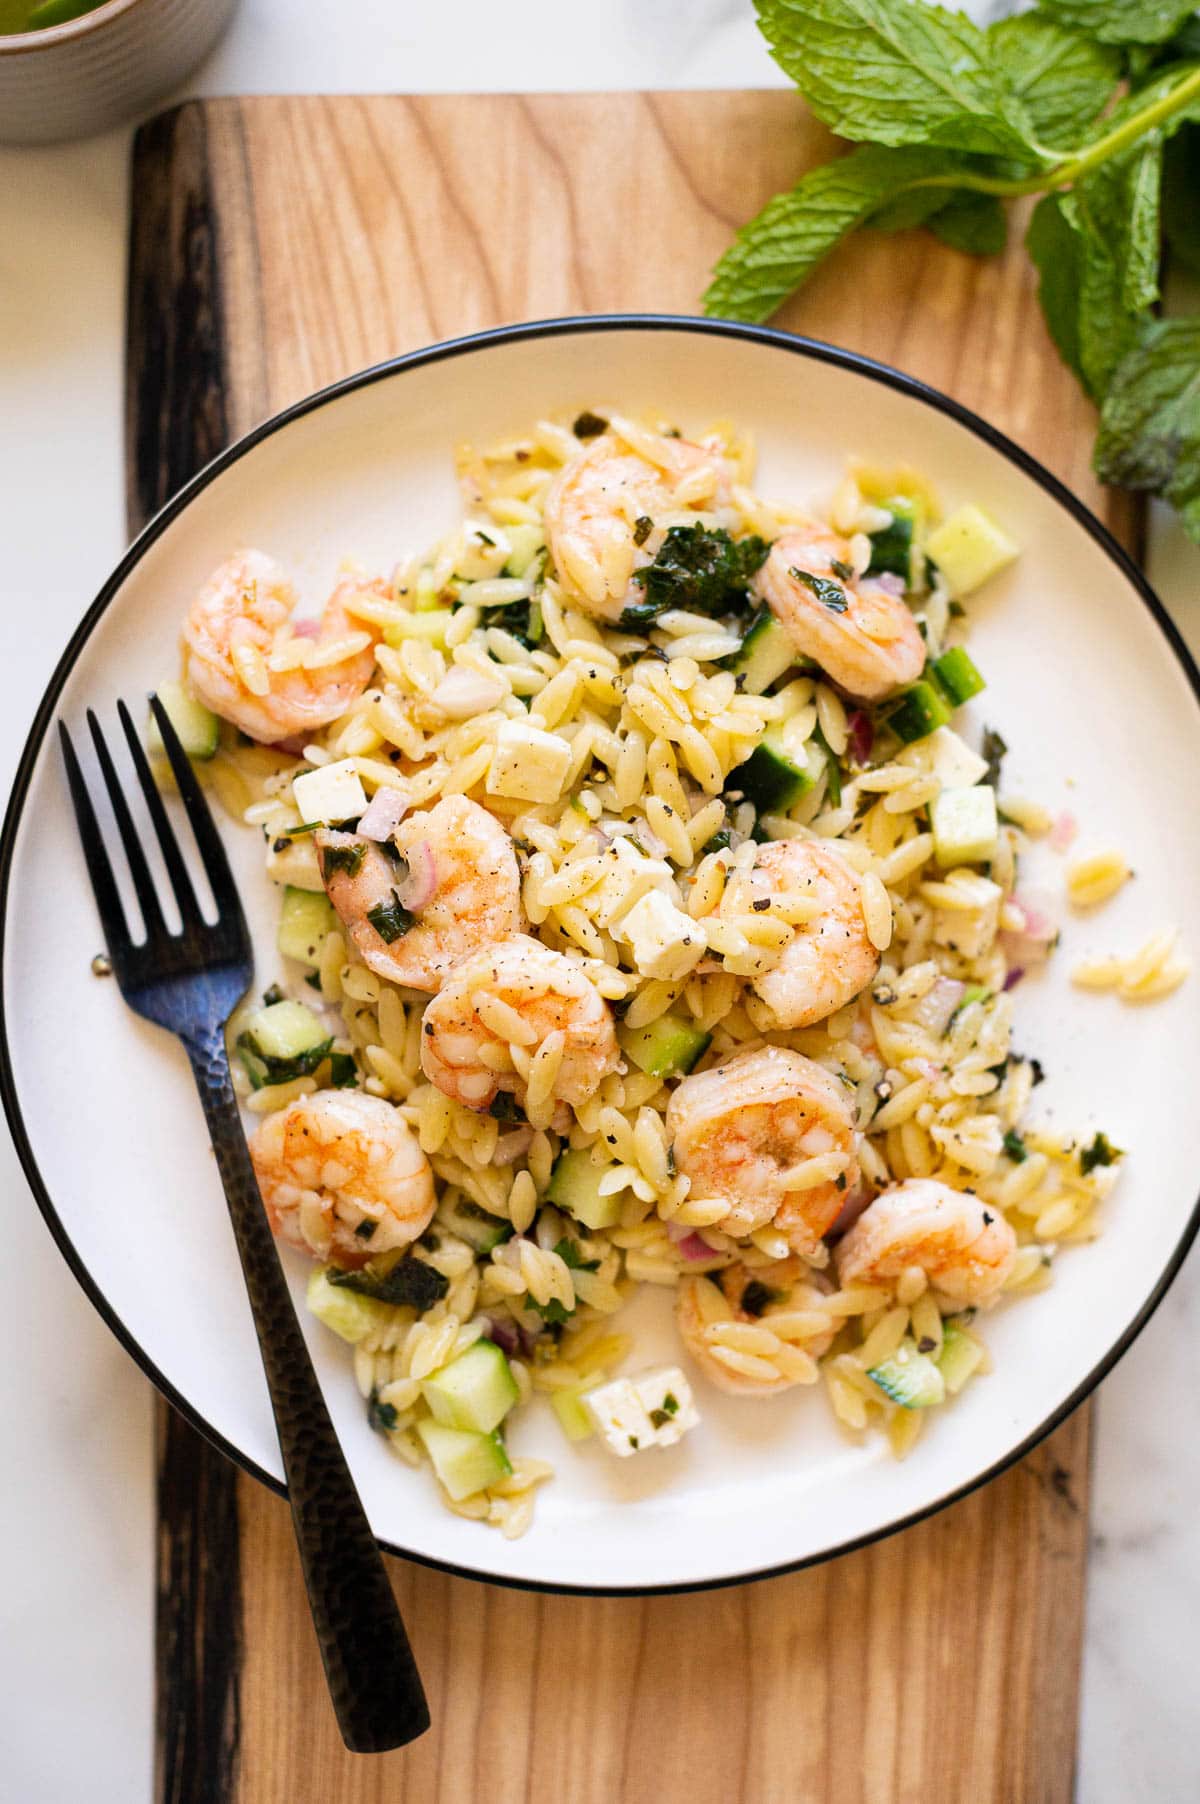 Ina Garten's shrimp orzo salad served on a plate with a fork on a wooden board. Mint as a garnish on a counter.